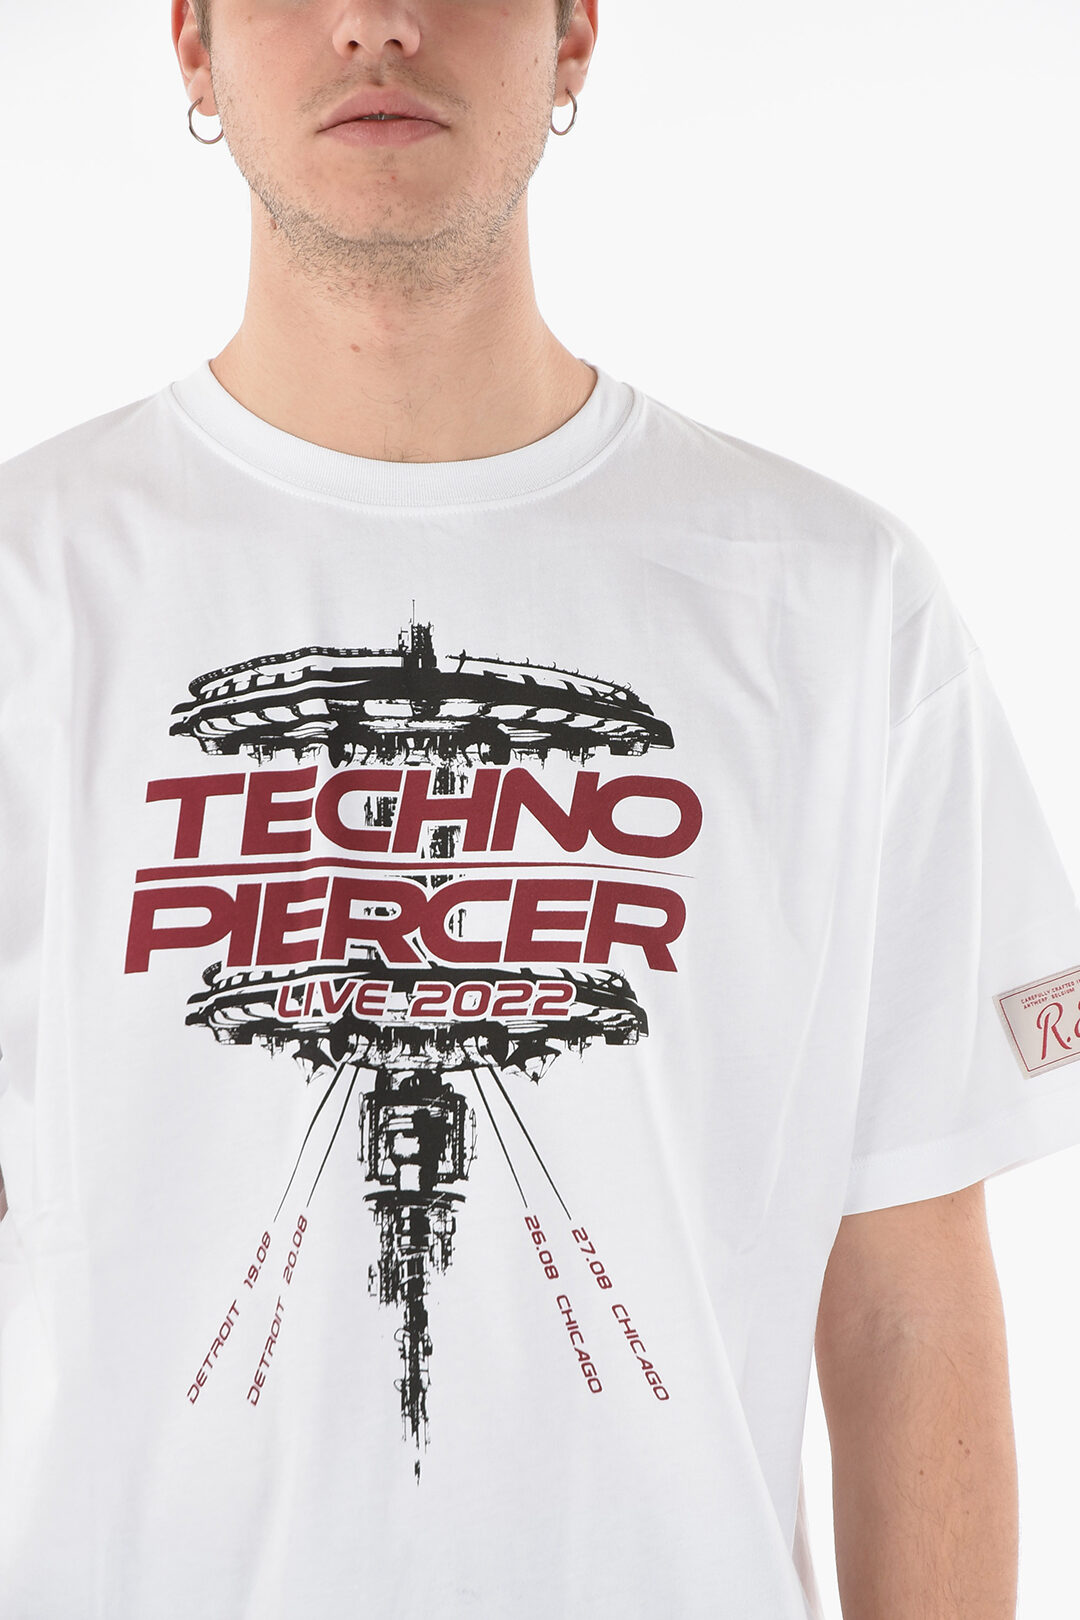 Over-sized TECHNO PIERCER T-shirt with Lettering